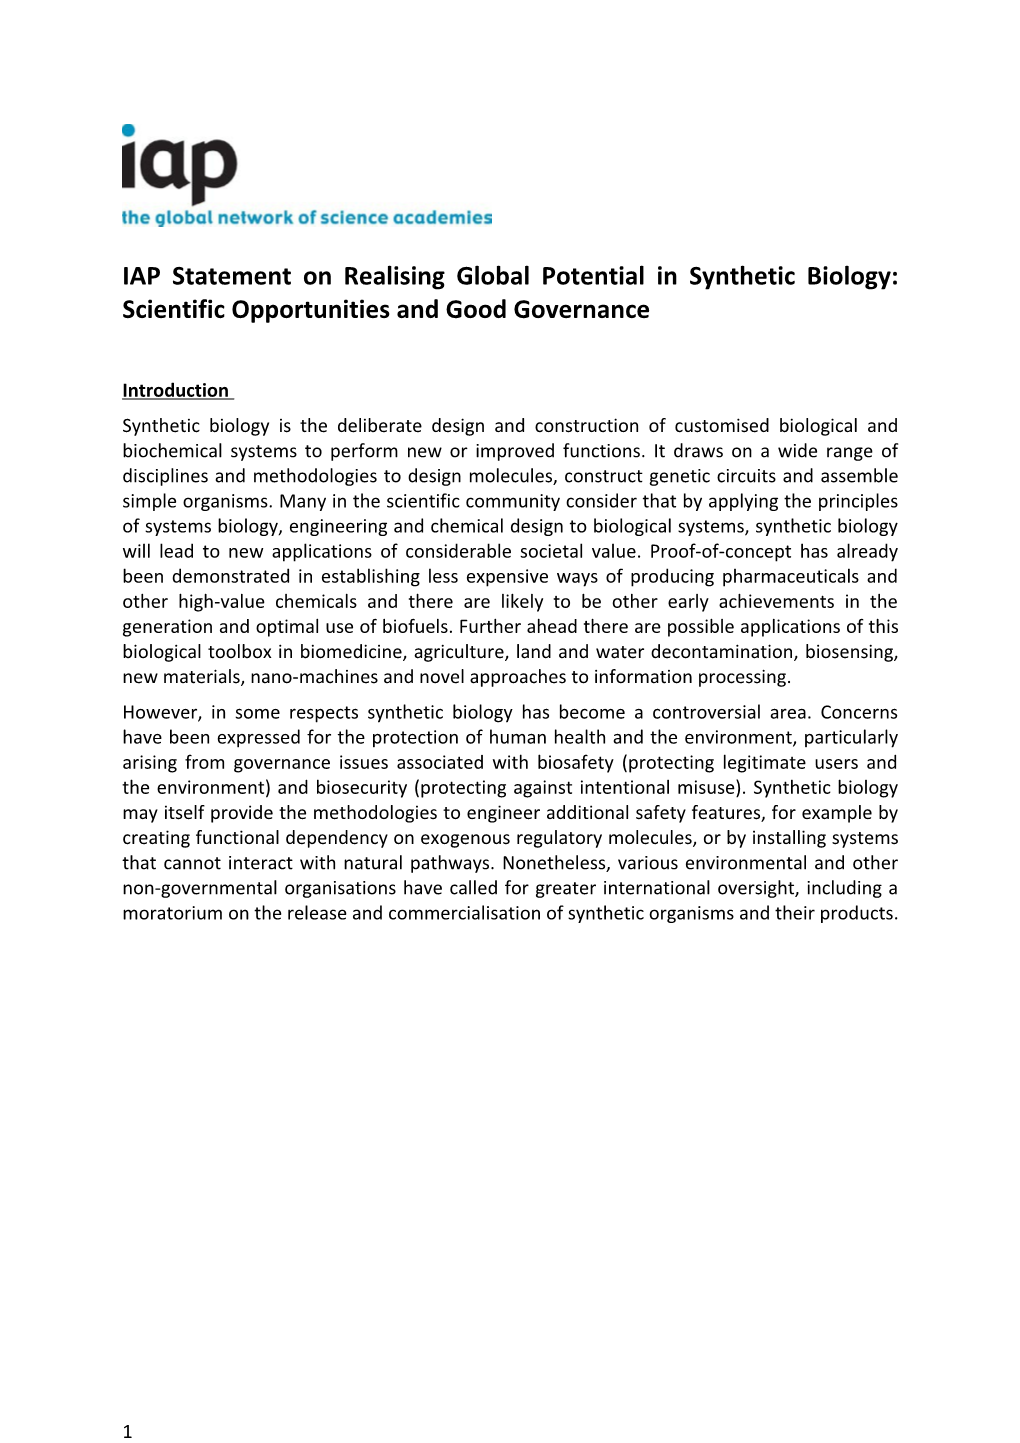 IAP Statement on Realising Global Potential in Synthetic Biology: Scientific Opportunities